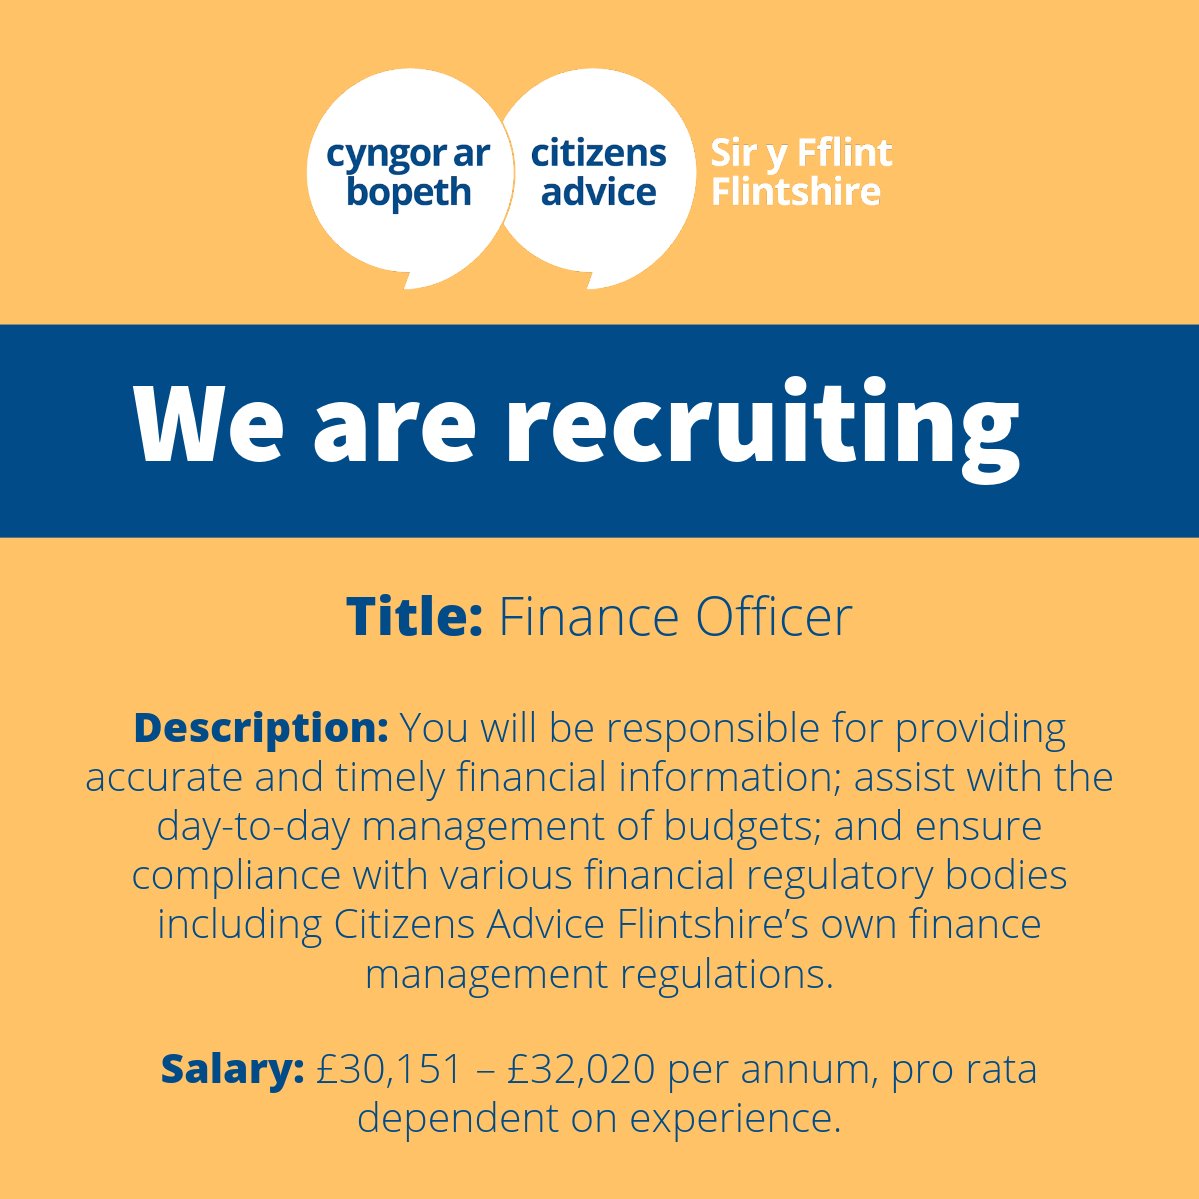 📊 Join Our Finance Team 📈 We're looking for a finance enthusiast to be a part of our dynamic team. This might be your dream role if you are passionate about numbers and community impact. Click the link below for details and to apply! flintshirecab.org.uk/work-with-us/ 

#FinanceJob